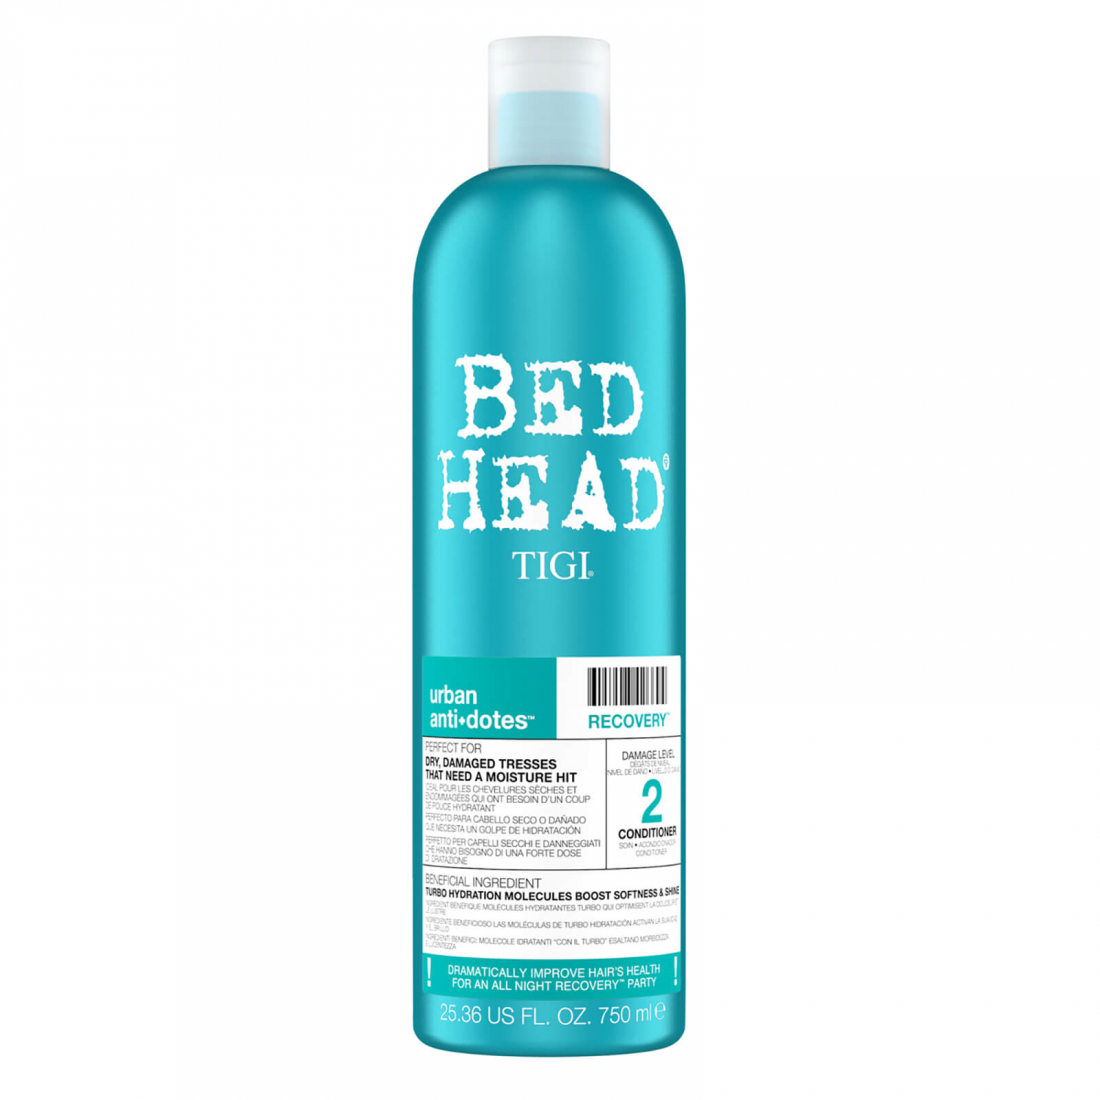 'Bed Head Urban Antidotes Recovery' Conditioner - 750 ml